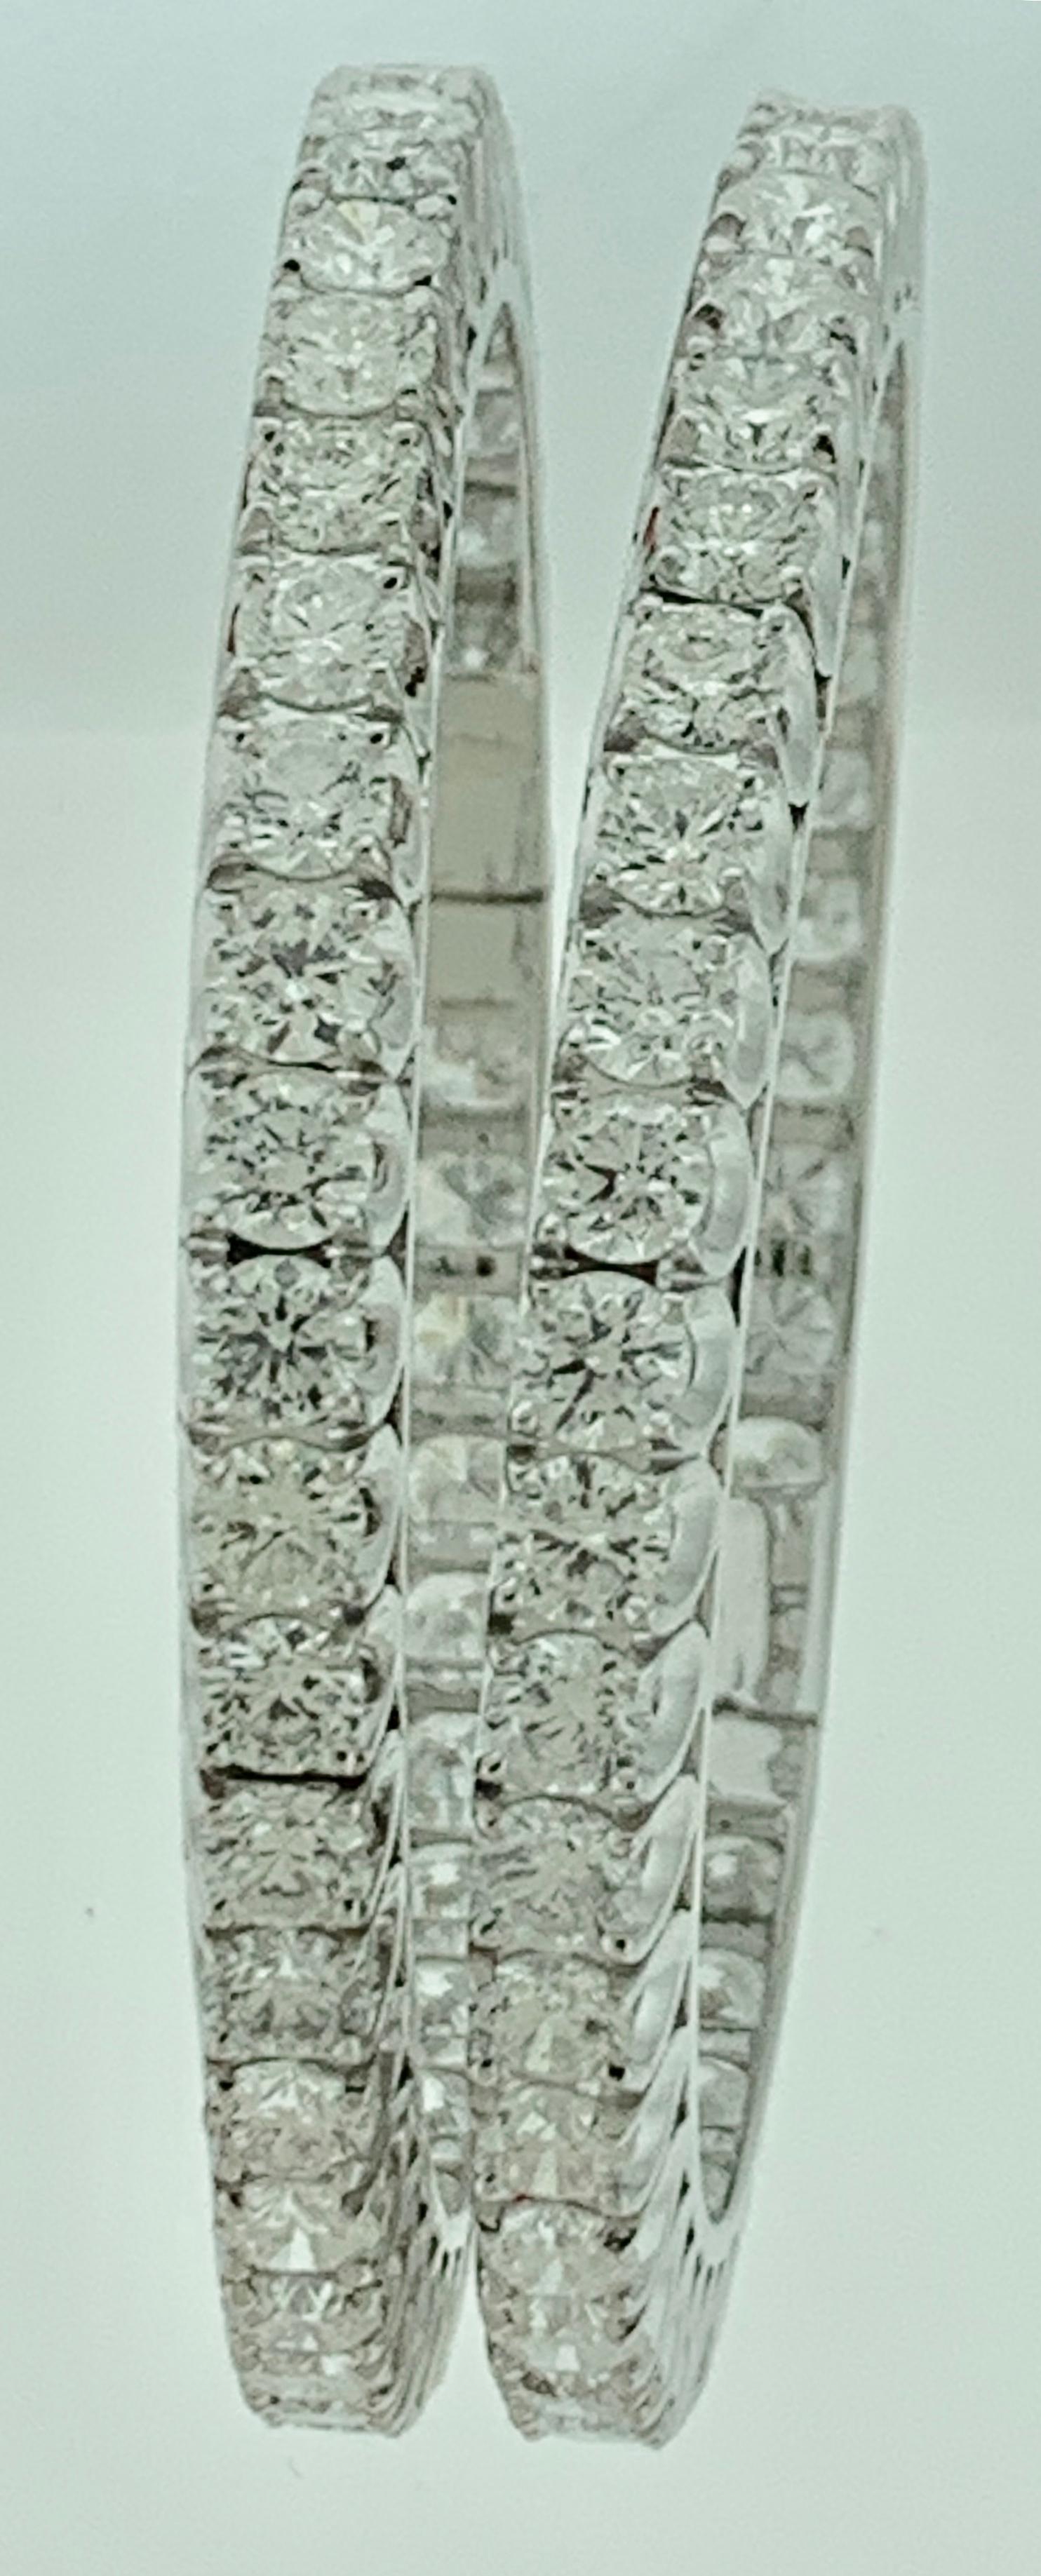 40 Pointer Each, 36 Ct Single line Eternity 18 Kt Gold and Diamond Bangle, Pair 2